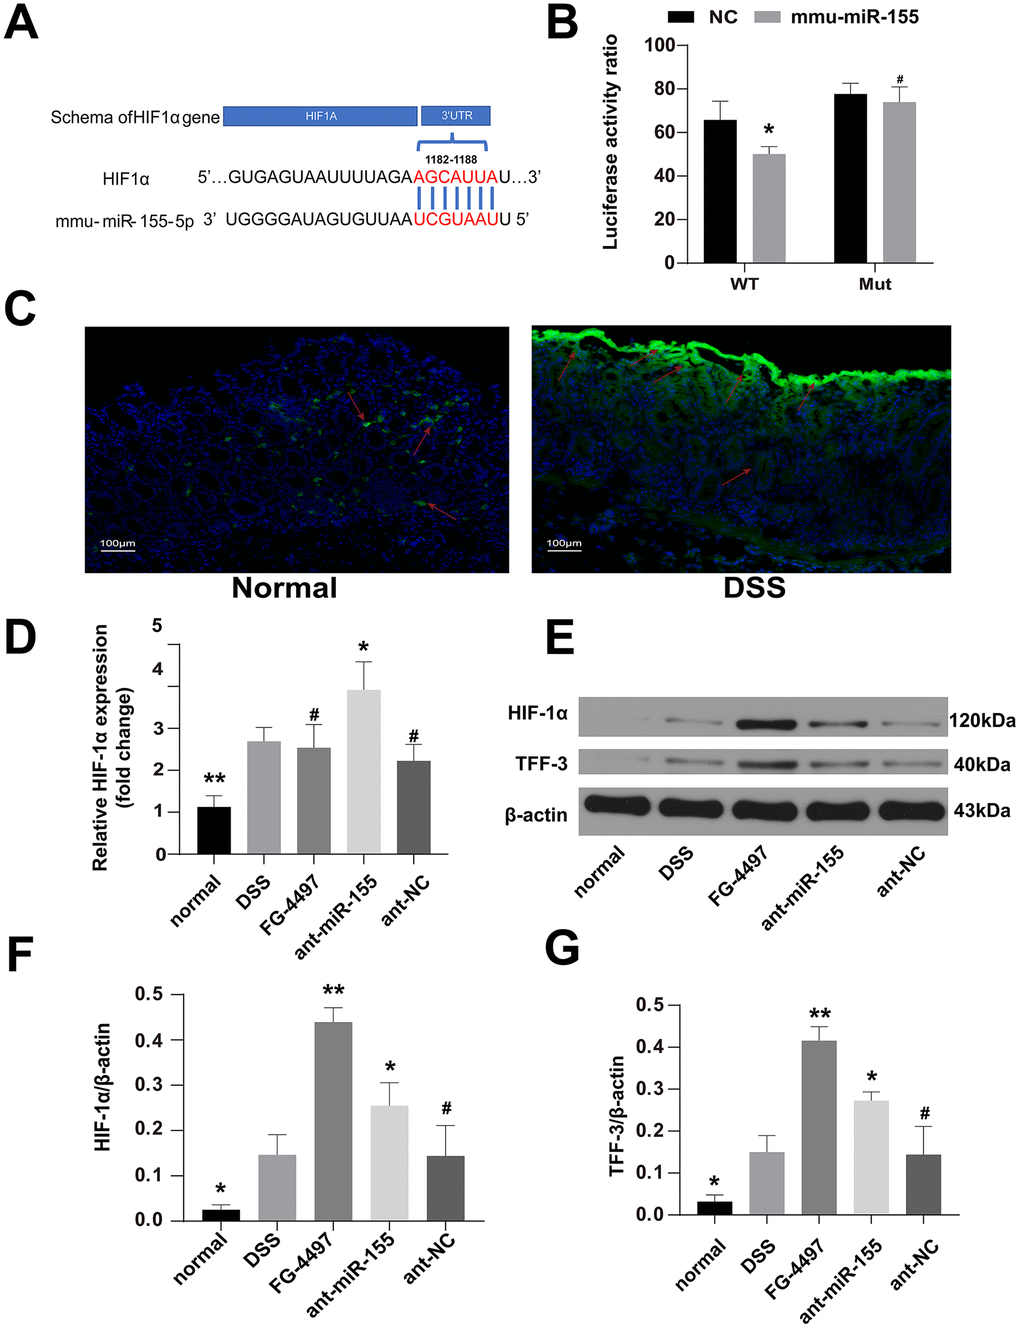 MiR-155 dilapidated intestinal barrier may by targeting HIF-1α/TFF-3 axis. (A) Wild-type sequences of HIF-1α for miR-155 target. (B) Dual luciferase report assay of HIF-1α 3’-UTR wild type or MUT along with miR-155. #P > 0.05, *P C) The hypoxic station in normal and DSS-induced colitis mice colon labeled by hypoxia Probes. Green was the positive signal. (magnification ×100). (D) Relative mRNA of HIF-1α in mice colonic tissue were measured by qPCR (n=5). (E) Western blotting analysis of HIF-1α proteins and TFF-3 proteins in mice colon. (F, G) Representative protein levels of TFF-3/β-actin and HIF-1α/β-actin(n=3). Each bar represents mean ± SD. #P > 0.05, *P 